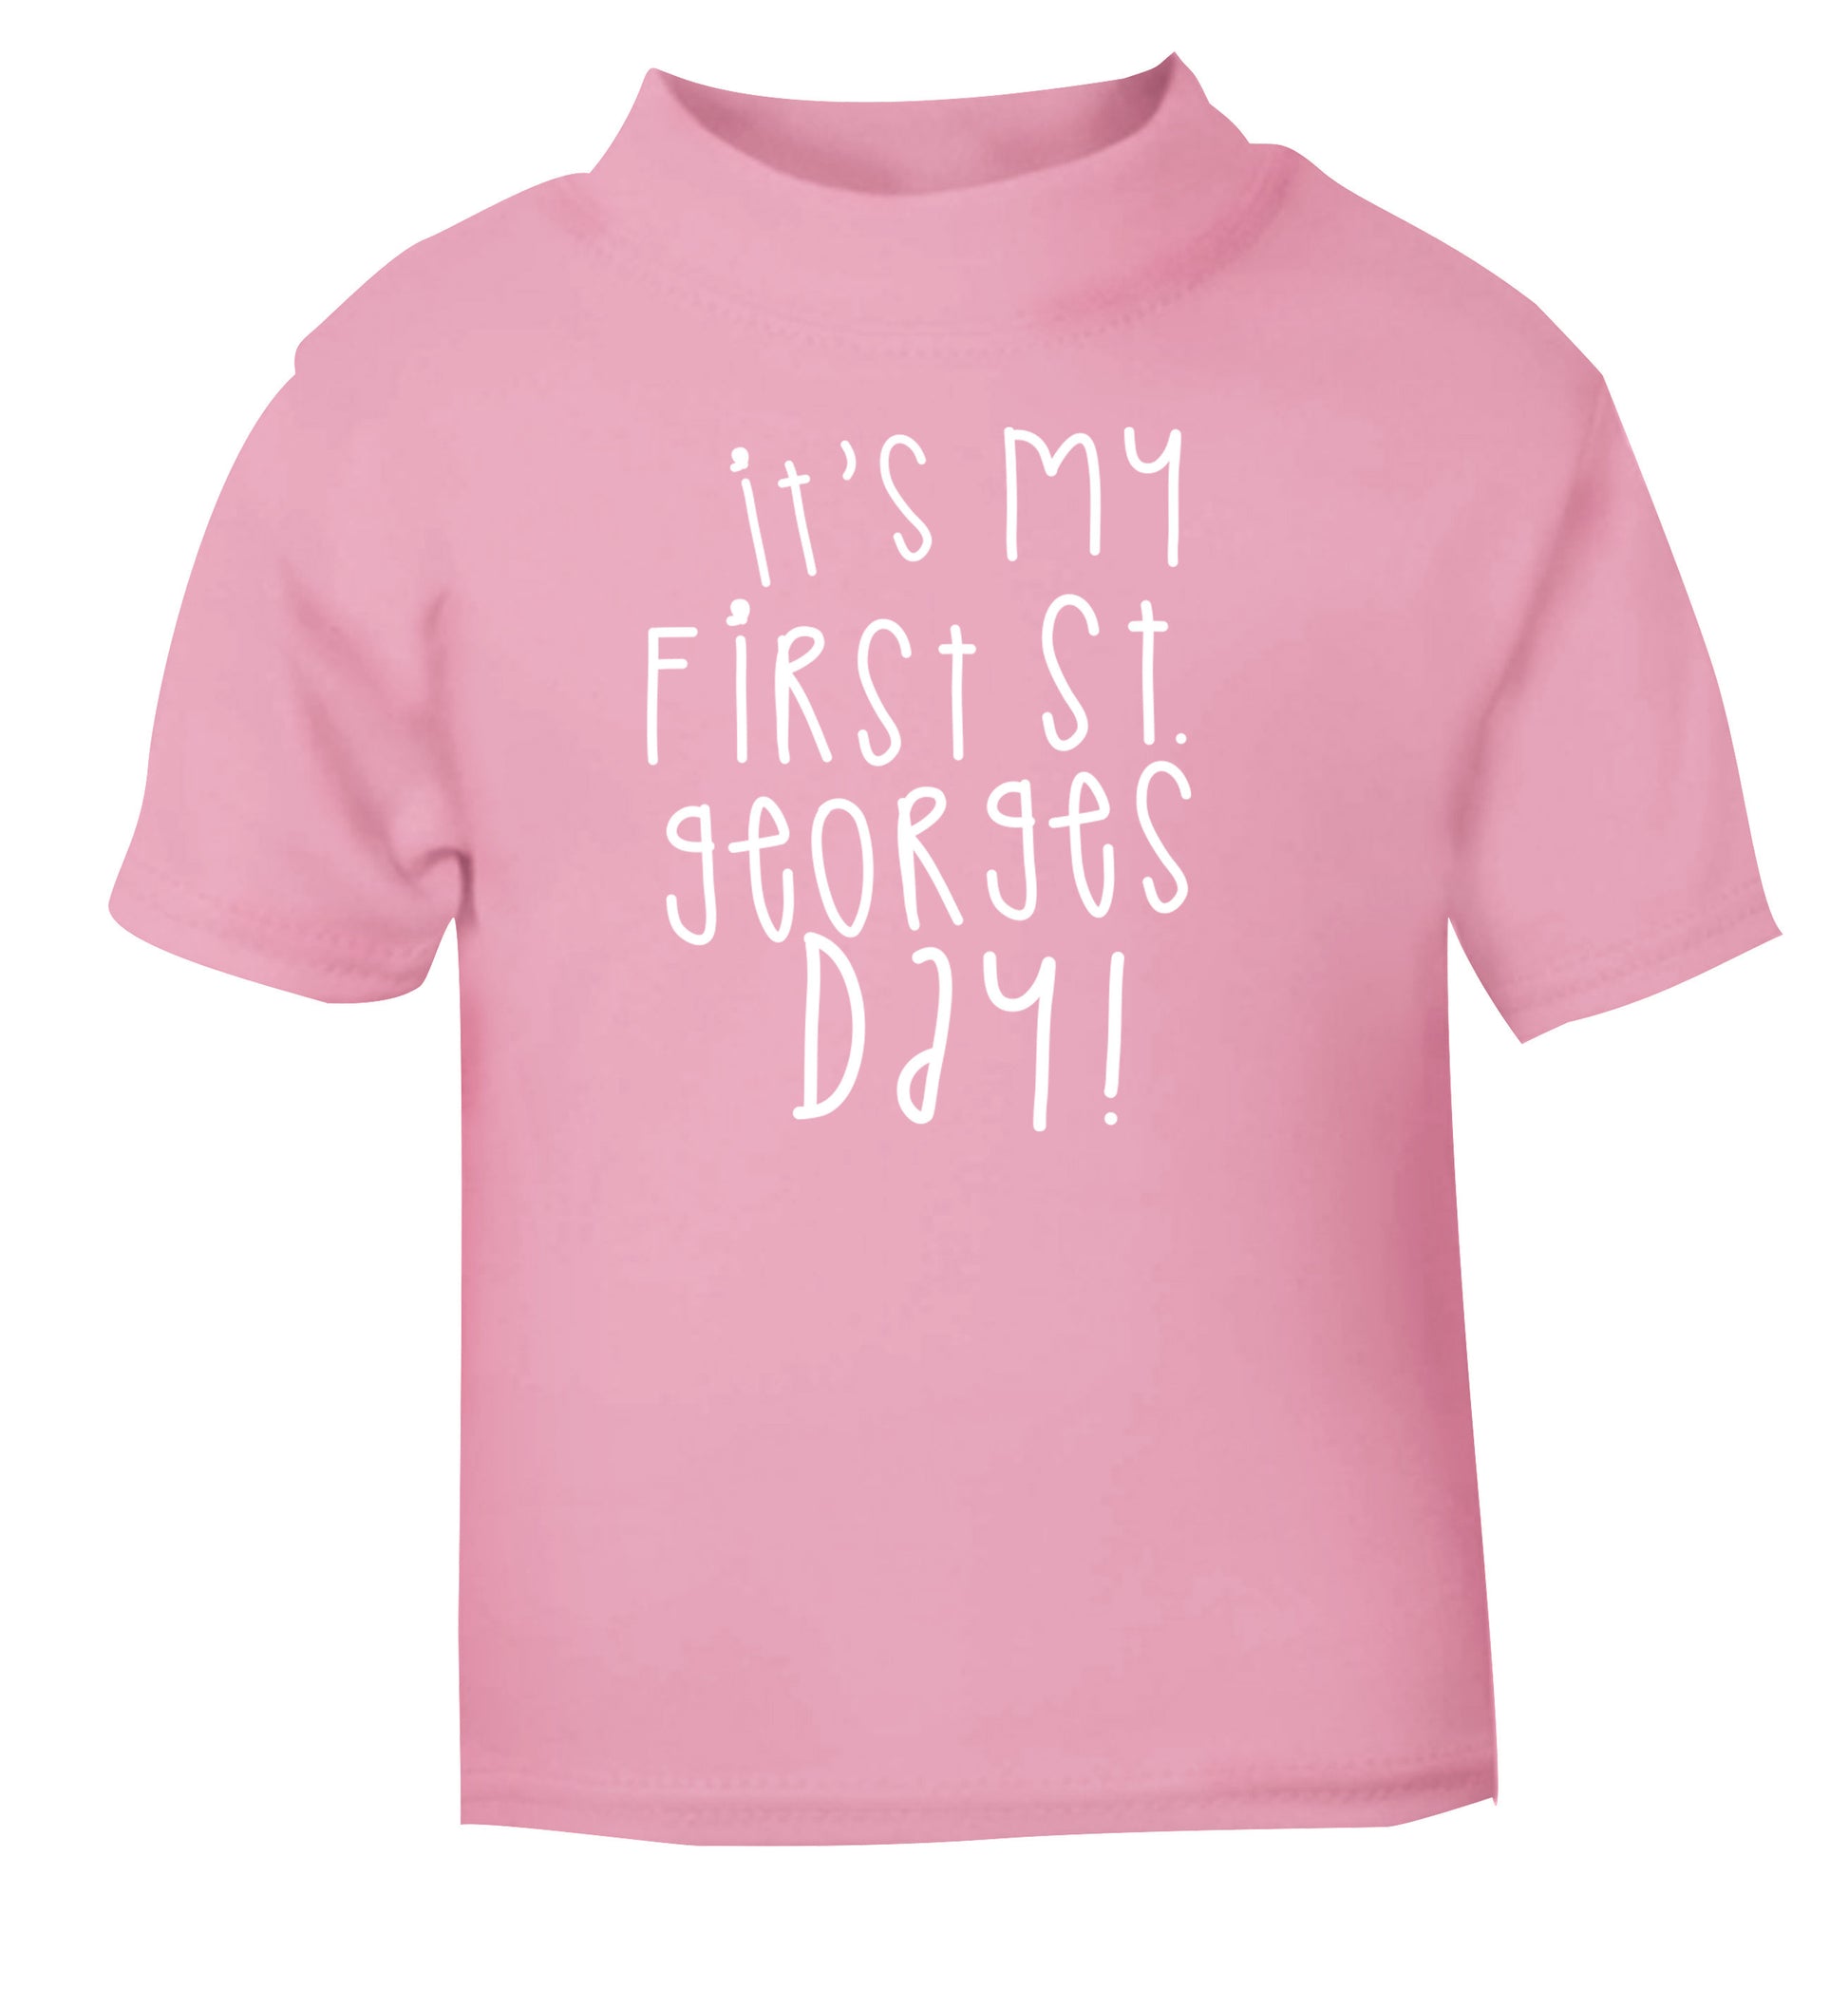 It's my first St Georges day light pink Baby Toddler Tshirt 2 Years